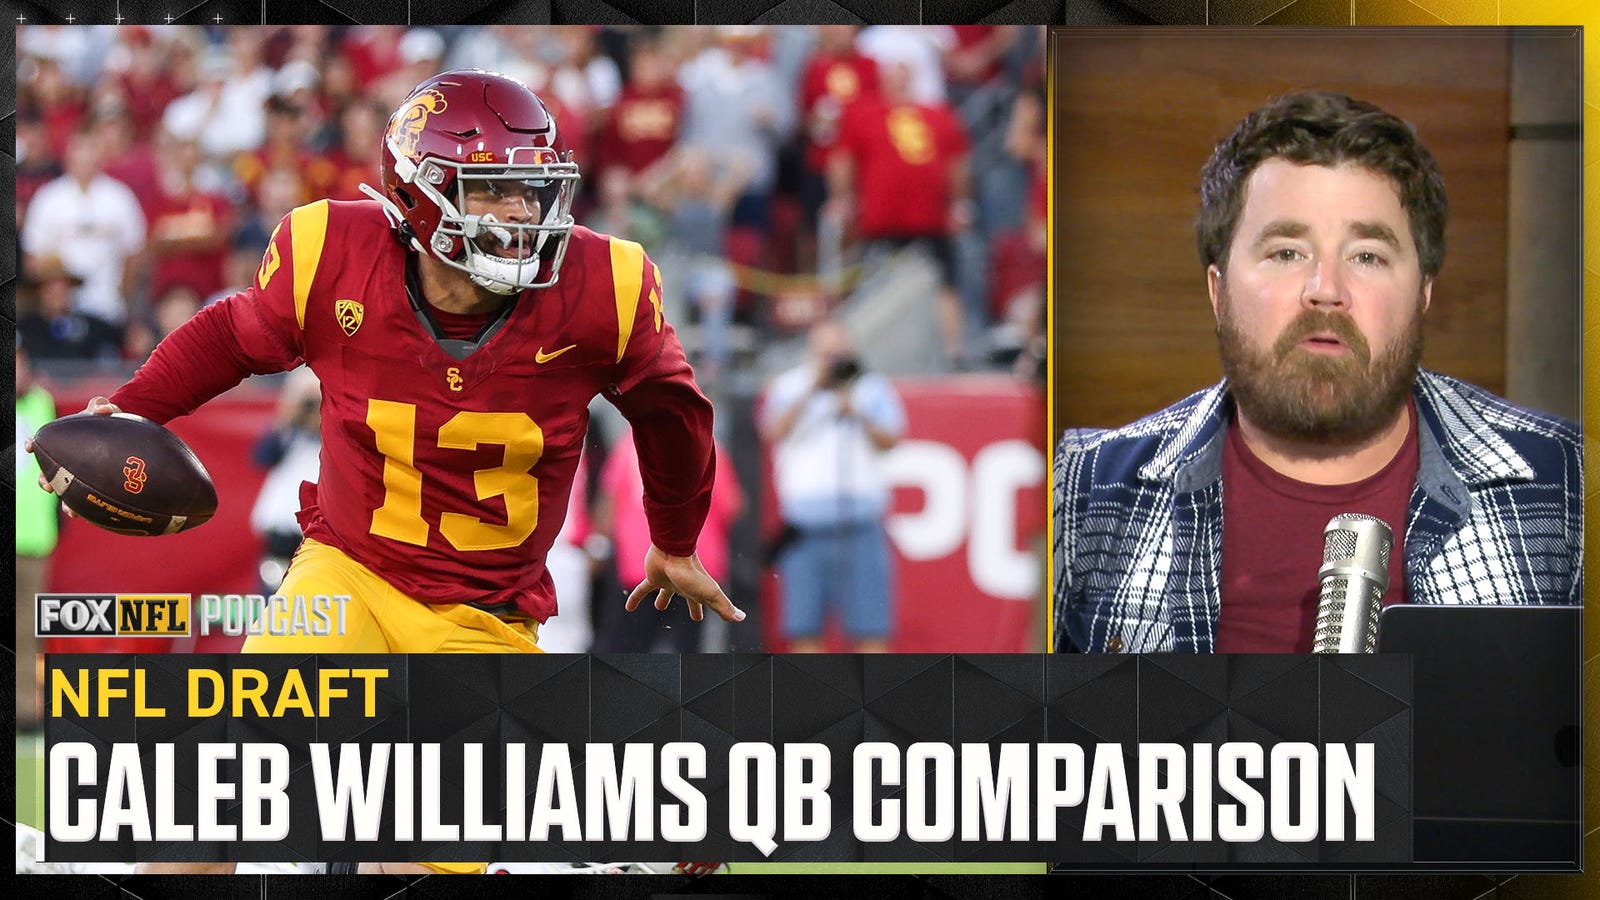 Where does Caleb Williams rank among former NFL QB prospects?